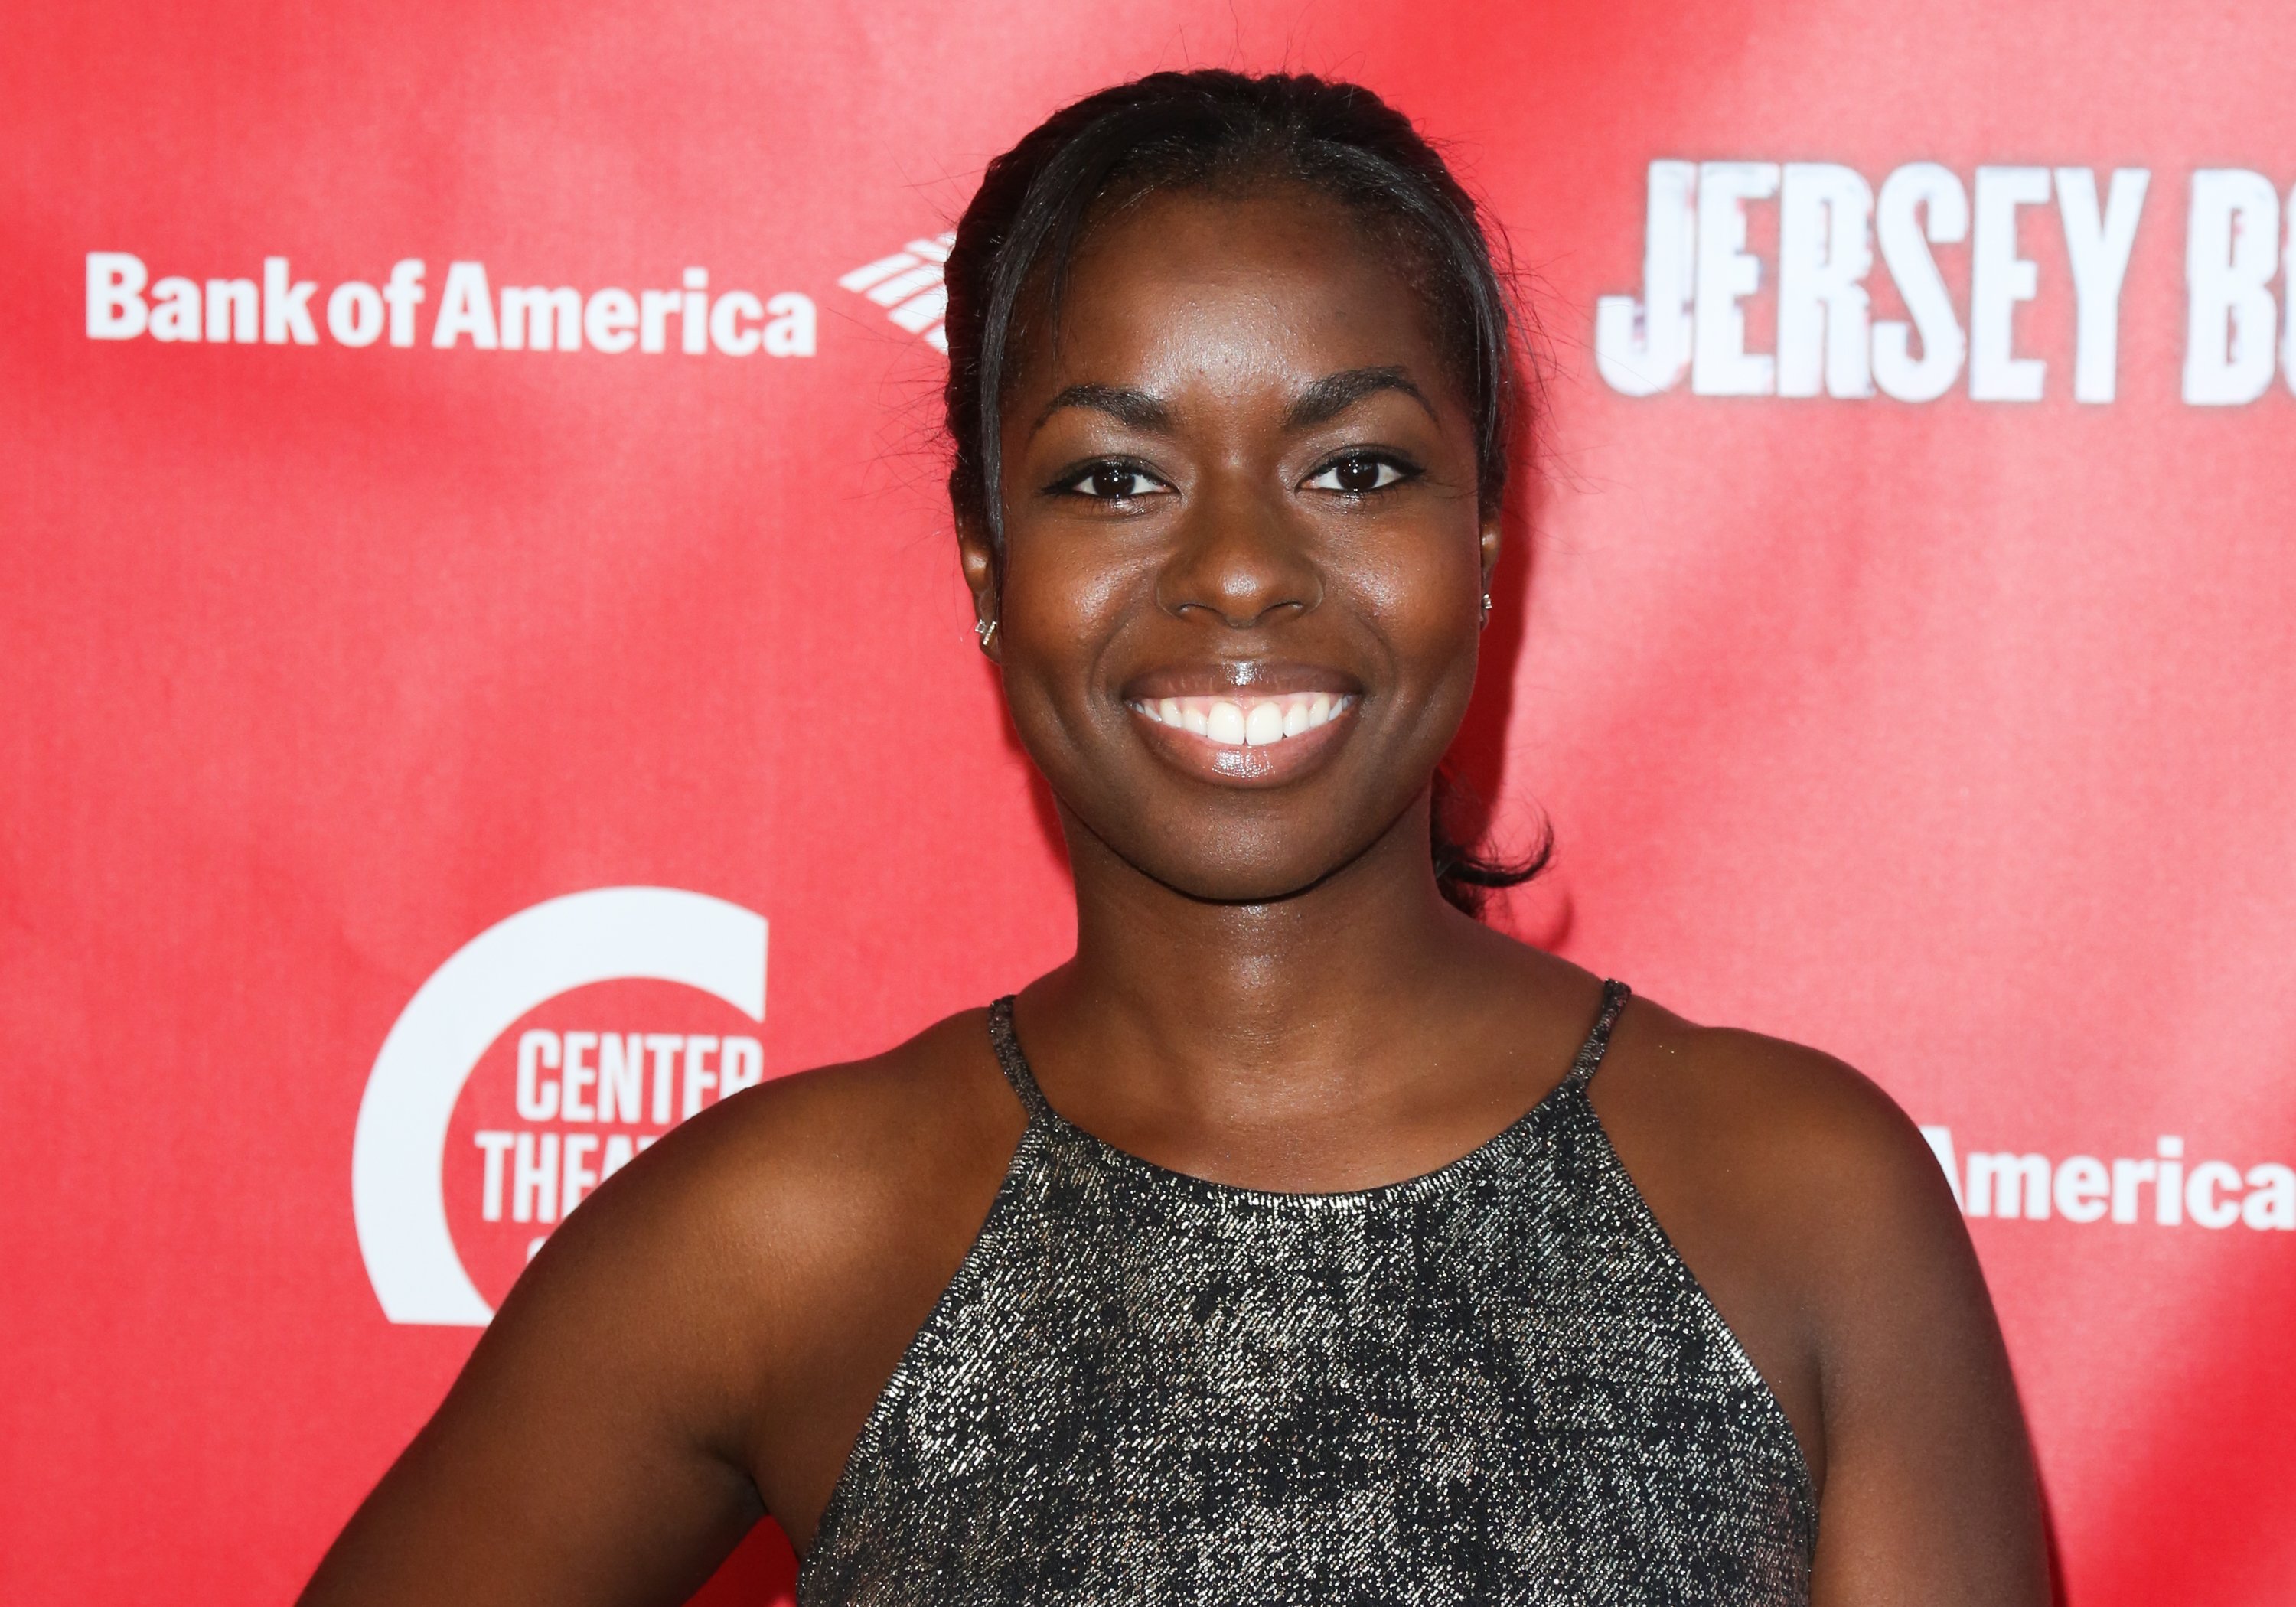 Camille Winbush pictured at the opening night of "Jersey Boys" at the Ahmanson Theatre on May 18, 2017 in Los Angeles, California | Photo: Getty Images